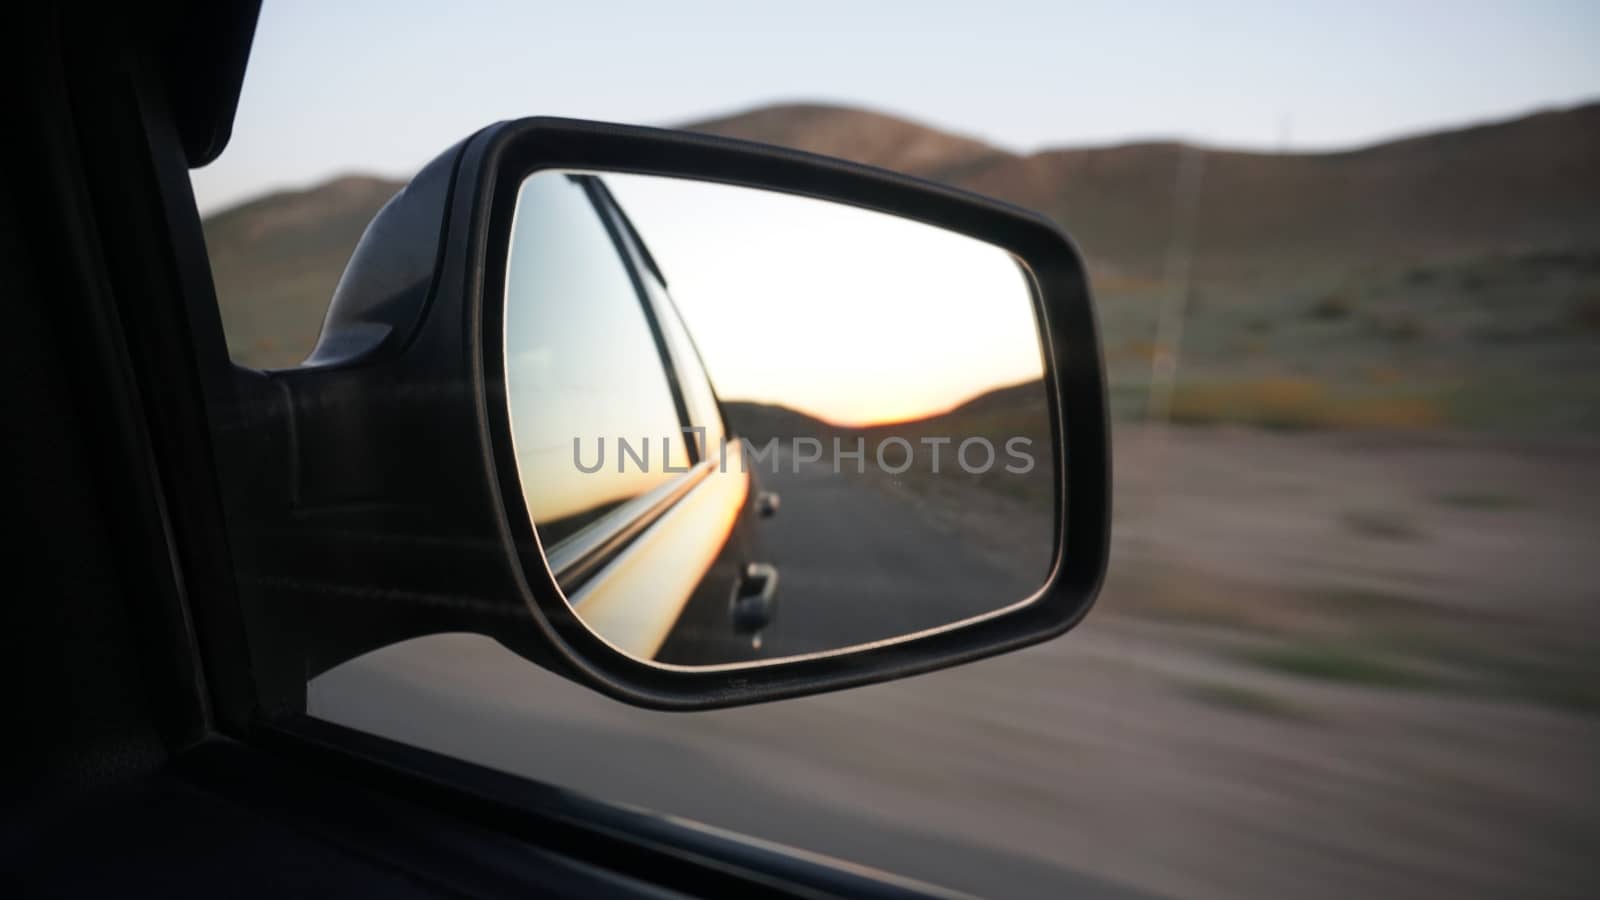 View in the side mirror of the car. by Passcal